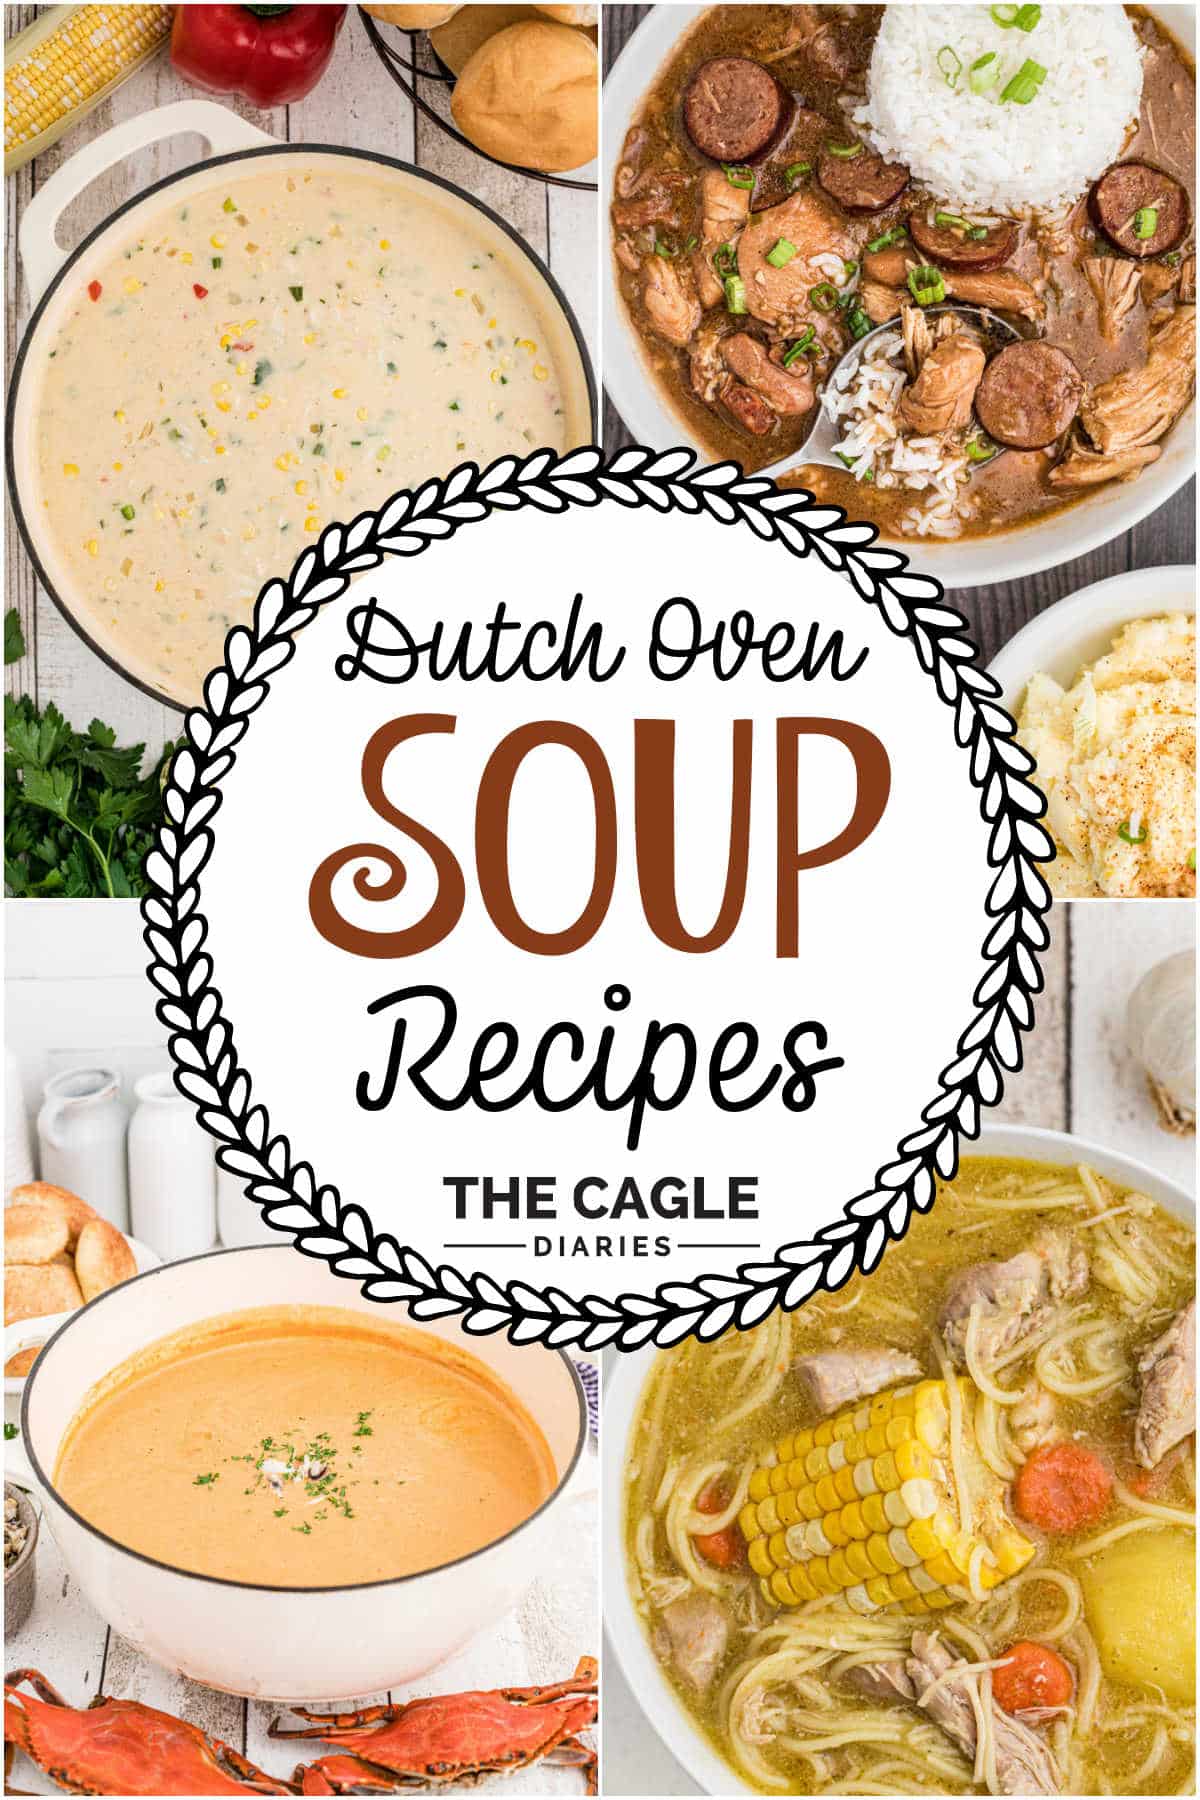 A collage of four images showing different Dutch Oven Soup Recipes with text overlay in the middle.